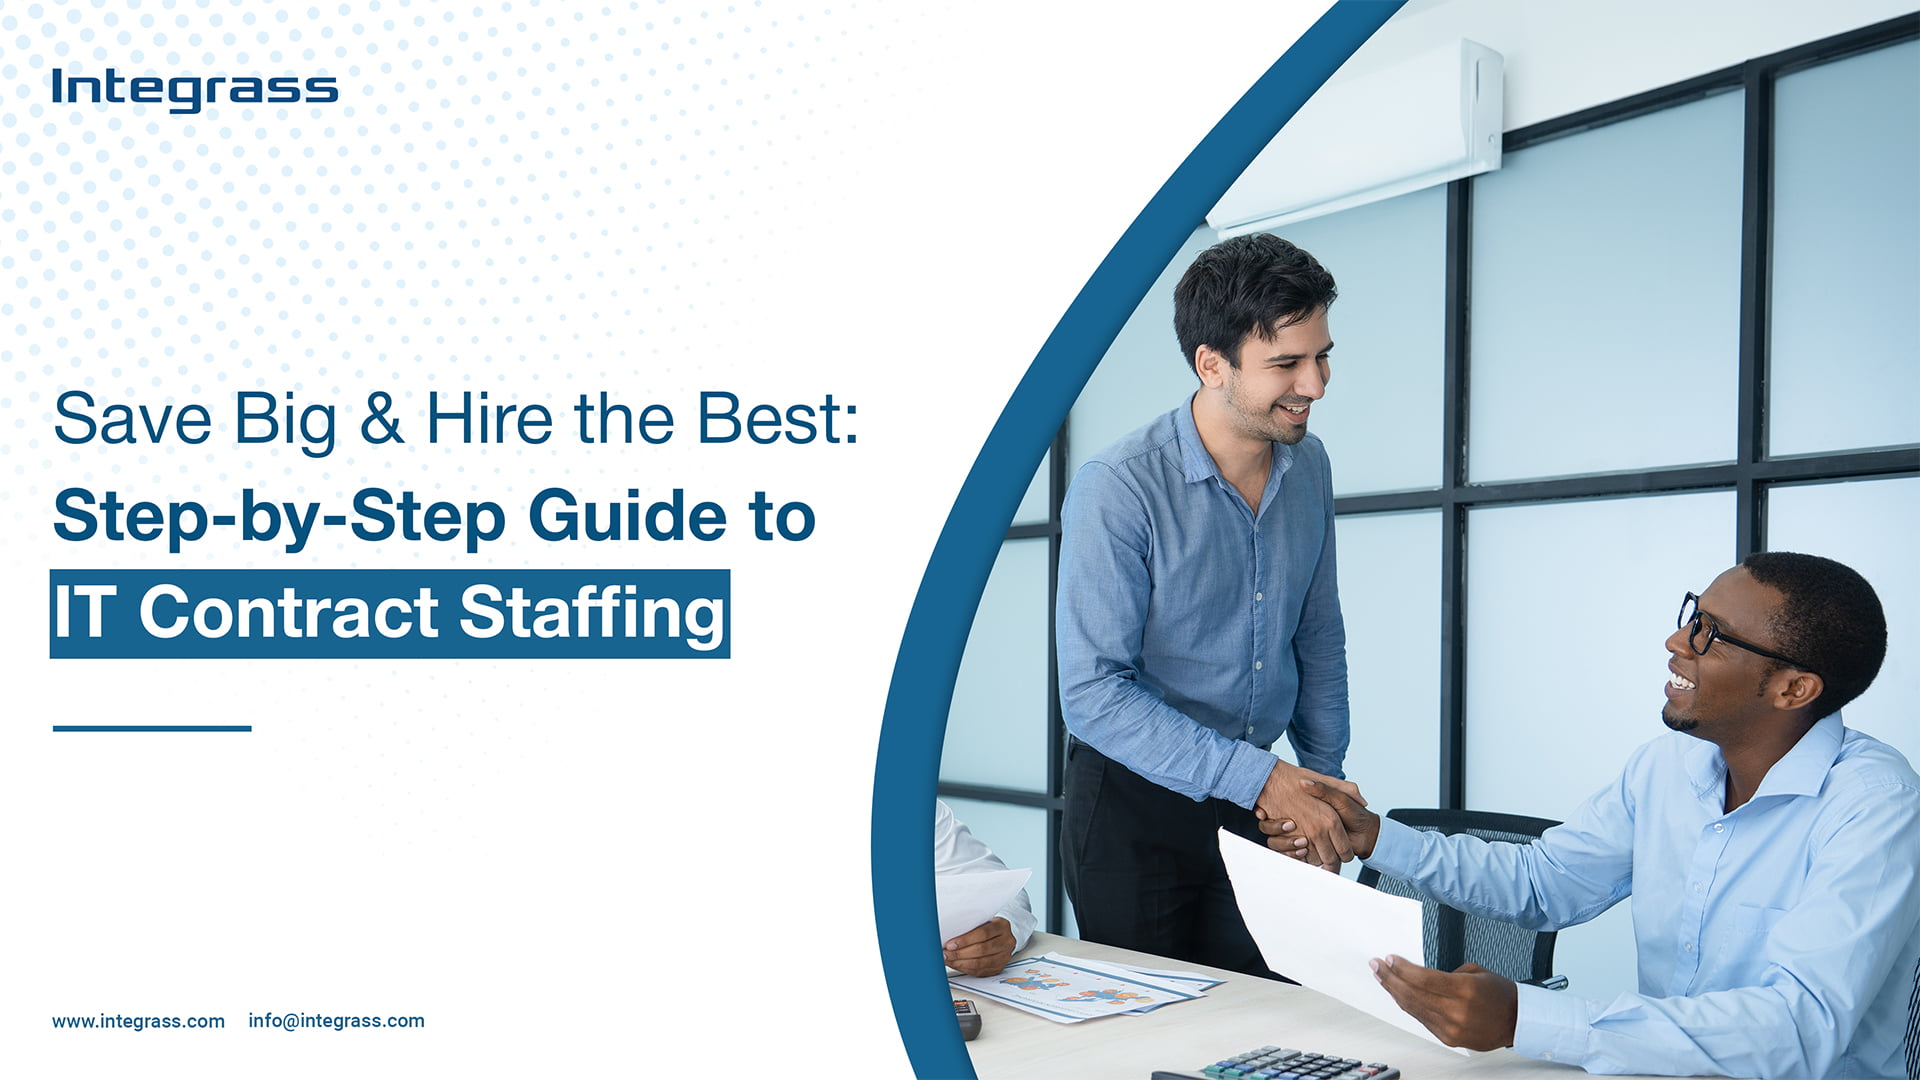 A guide to IT contract staffing: Save money and hire top talent with this step-by-step manual.